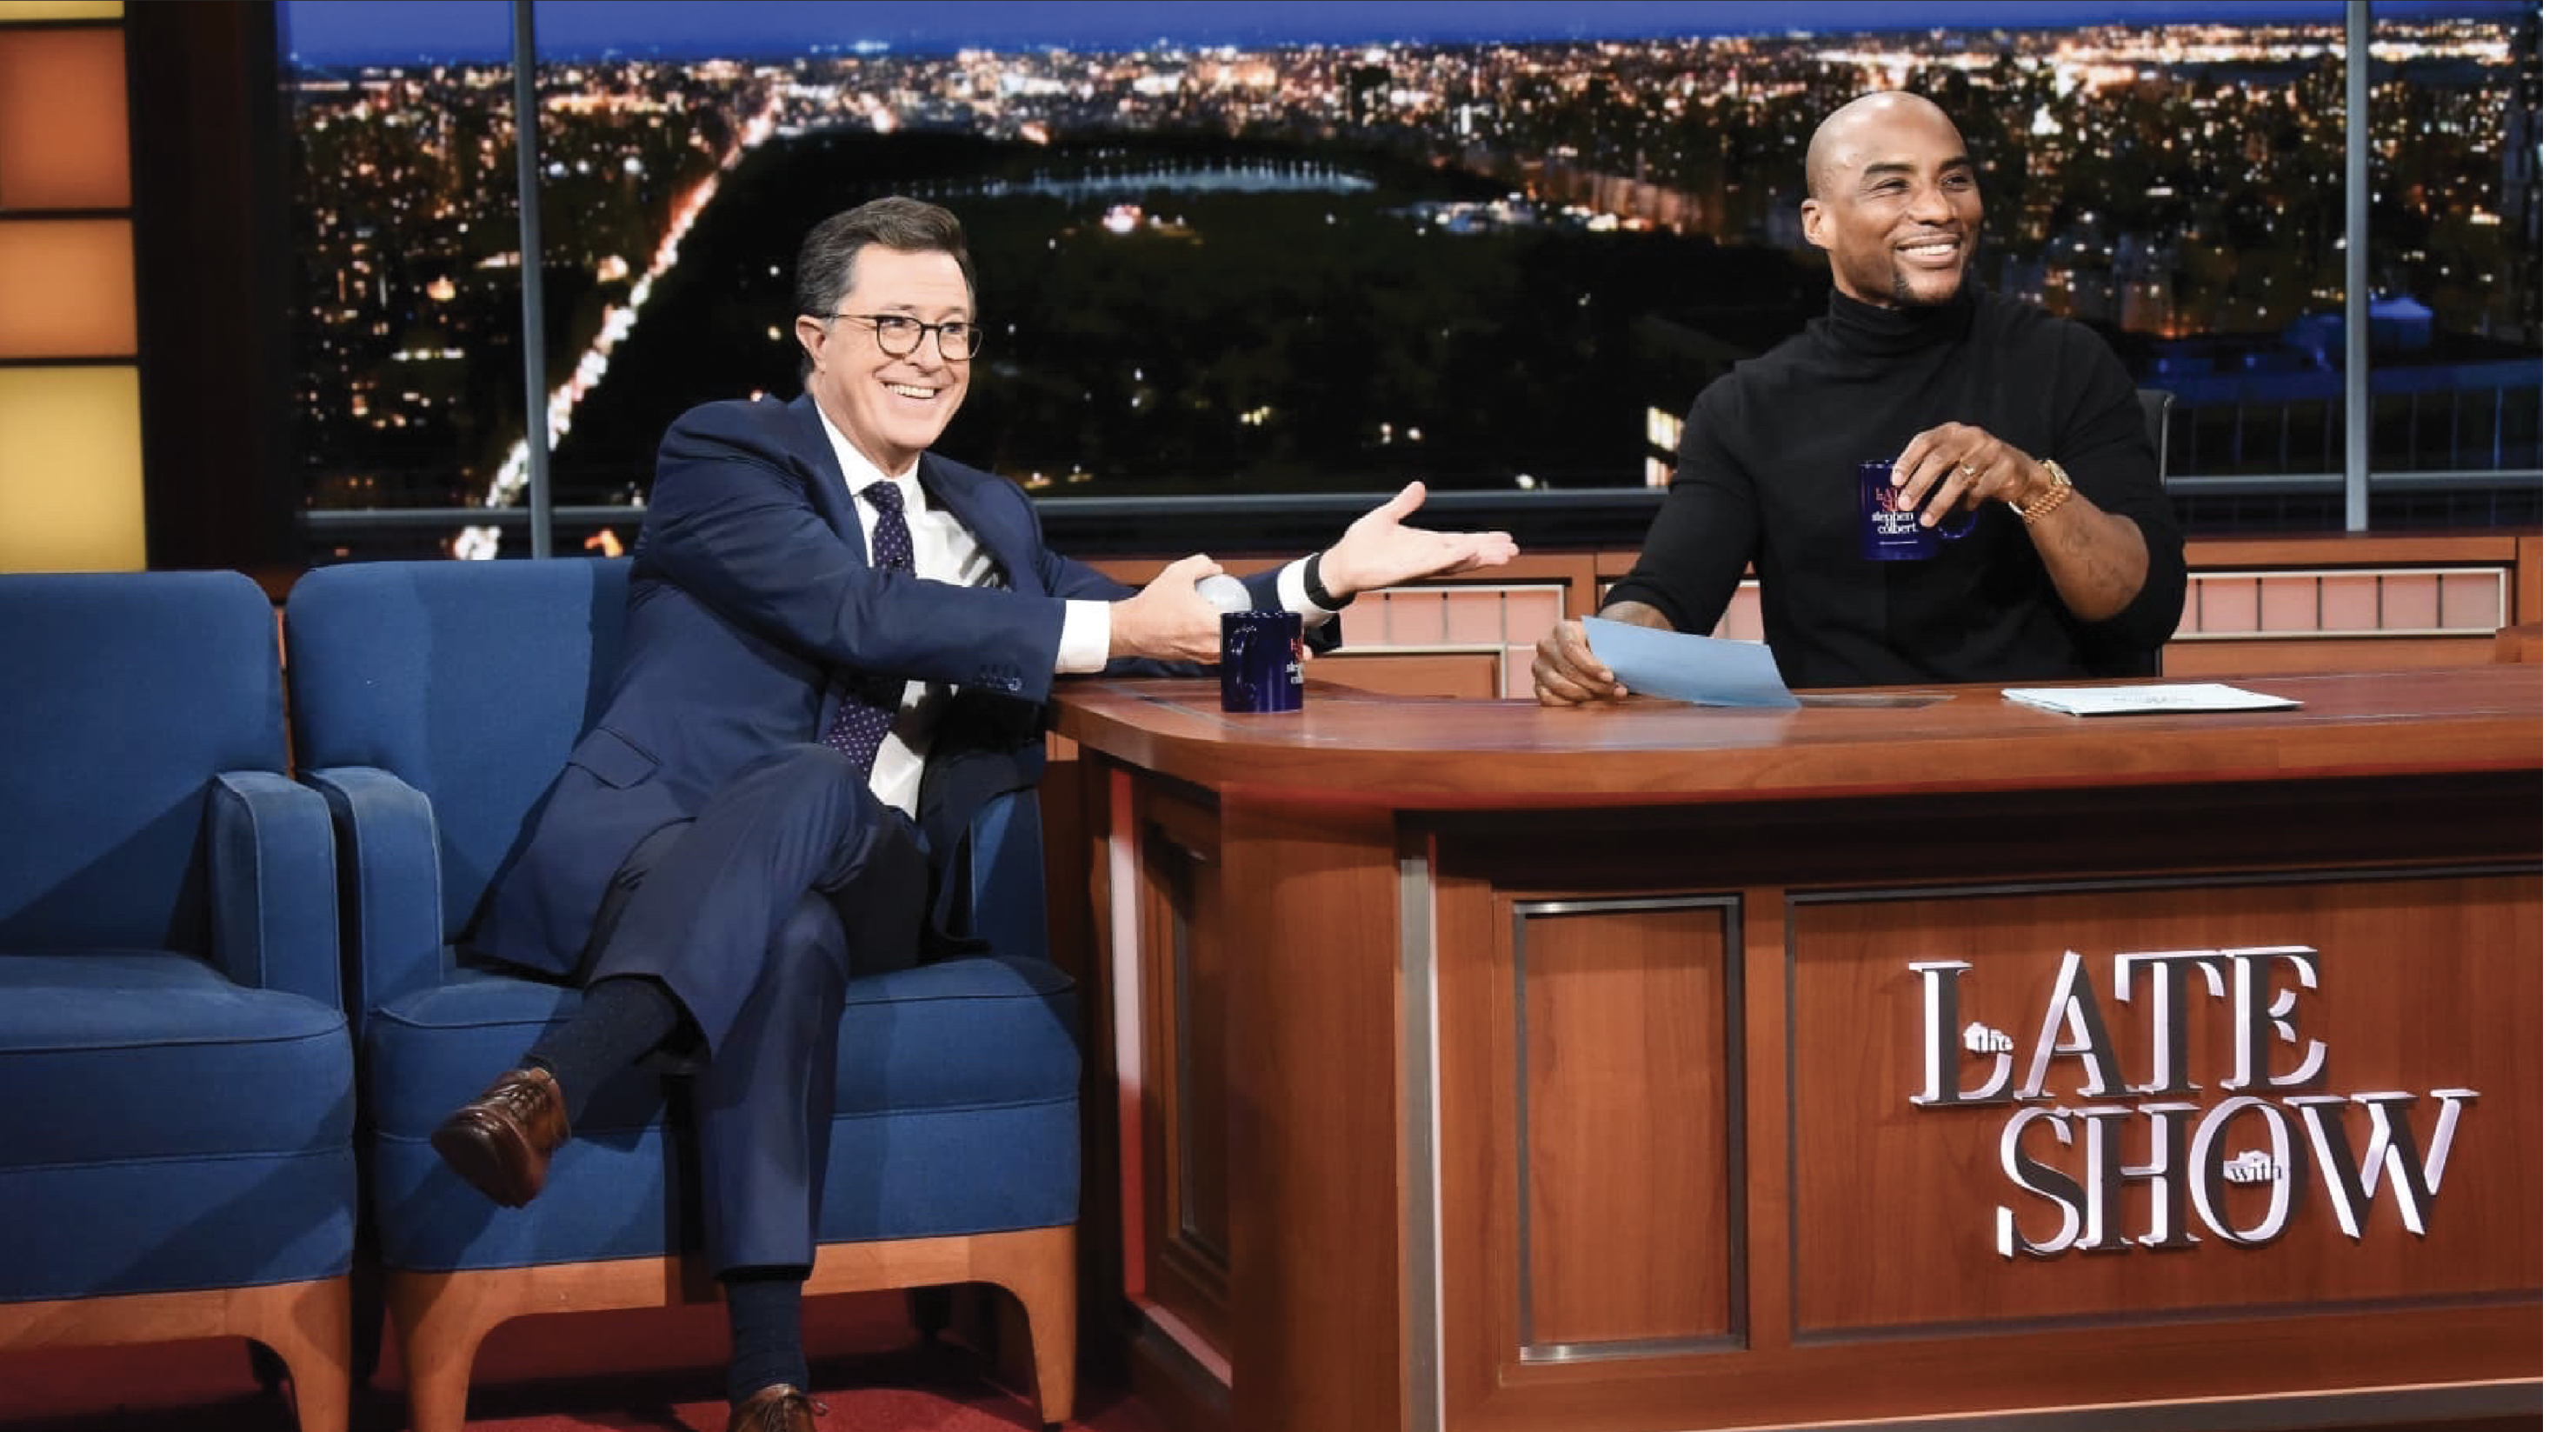 On The Late Show with fellow Lowcountry native Stephen Colbert, who also serves as an executive producer of the Comedy Central Show,  Hell of a Week with Charlamagne Tha God.